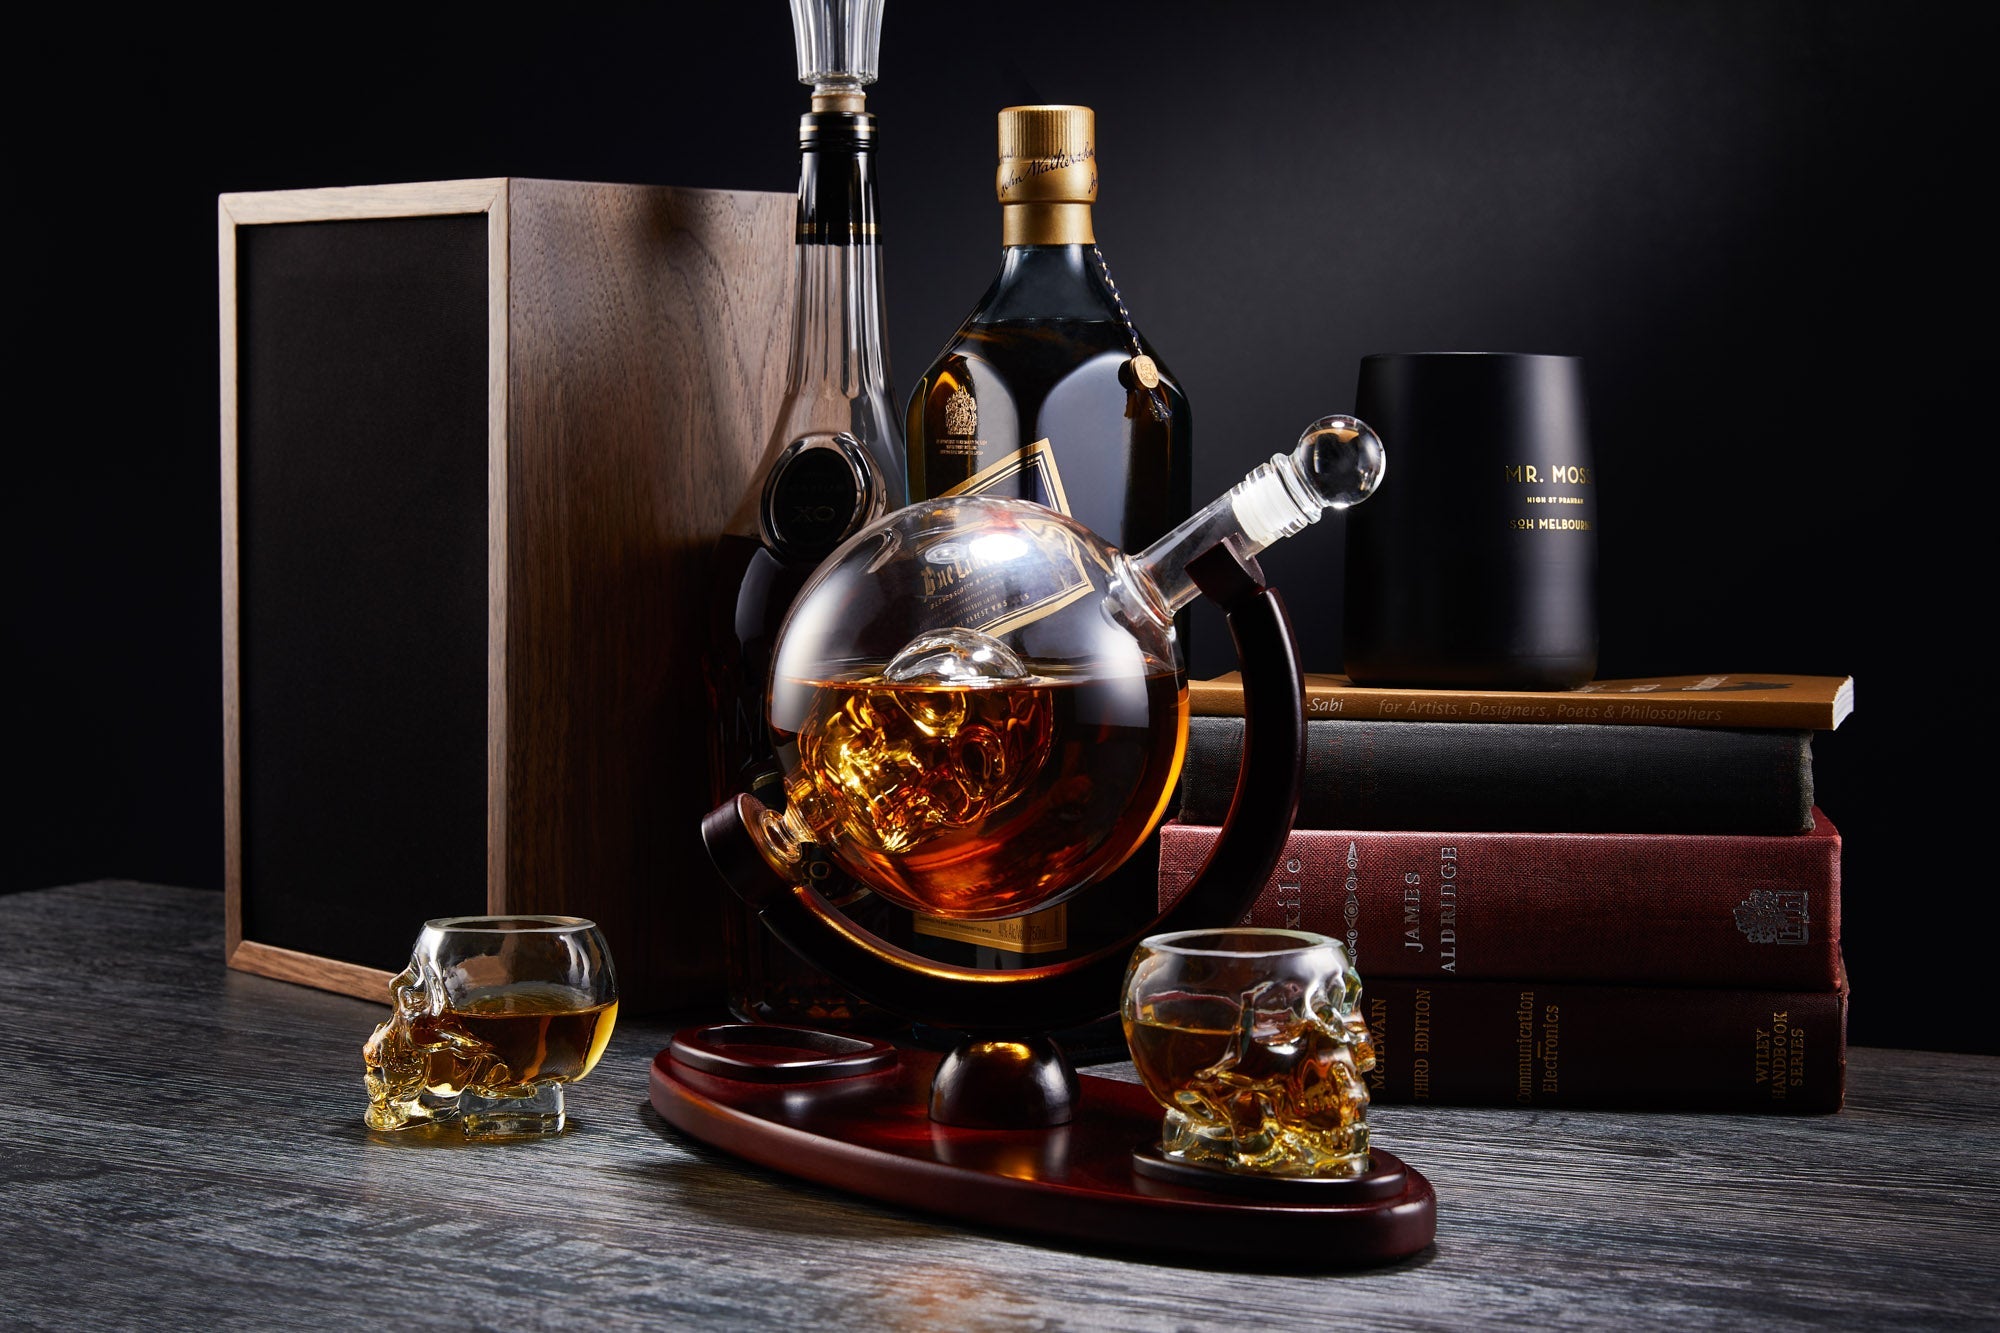 Skull Whiskey Decanter Set by Infused Barware